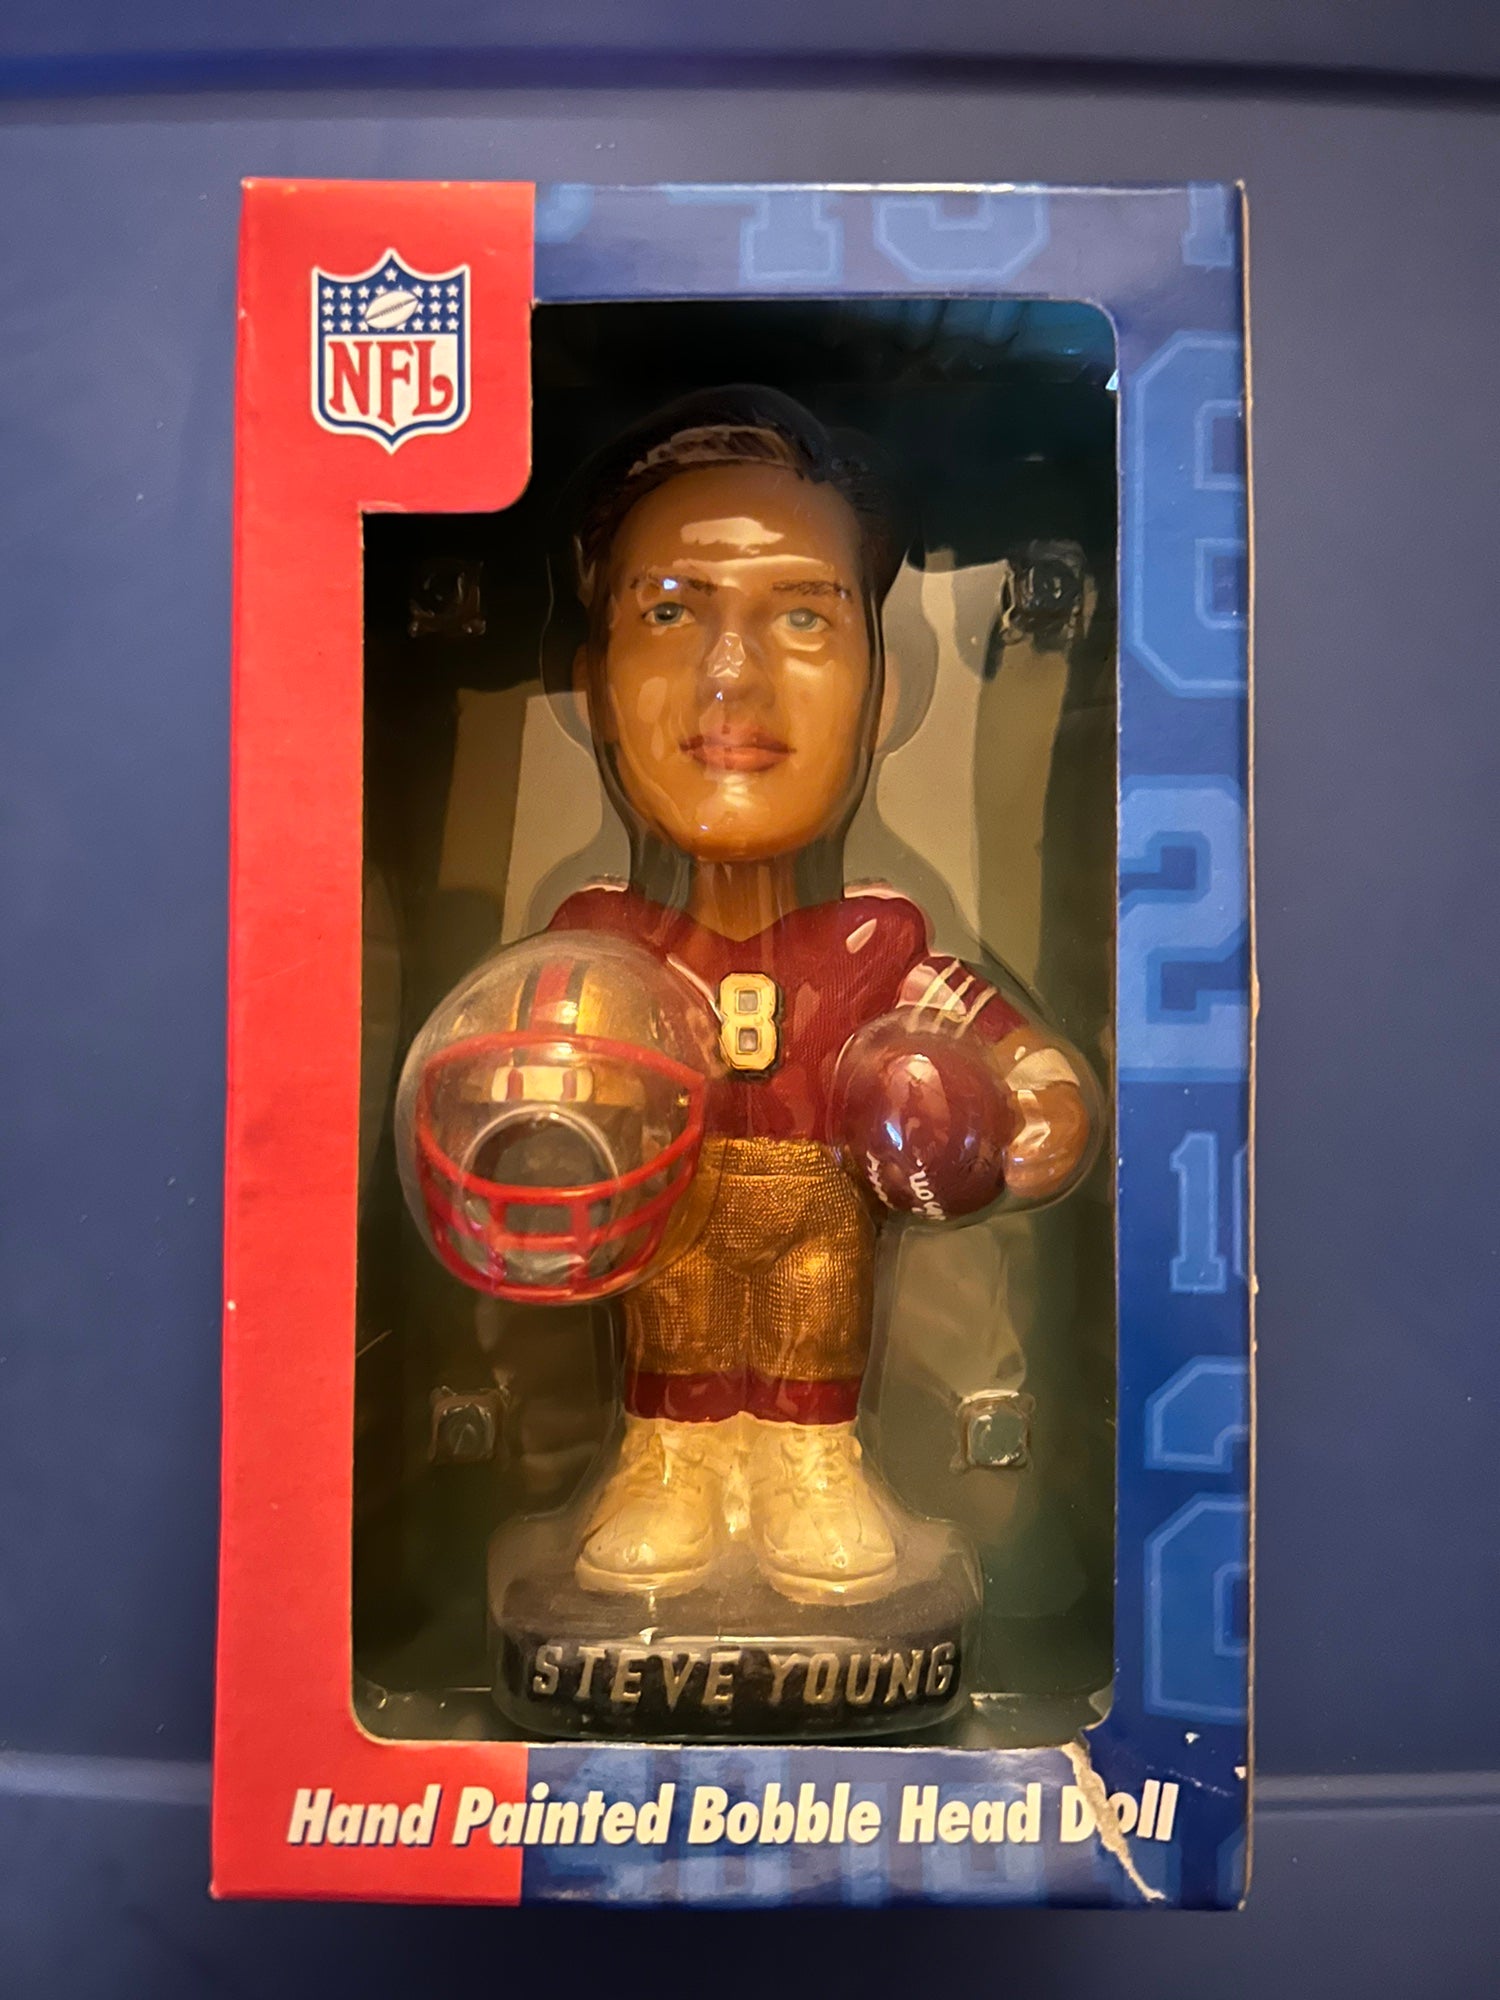 Football Figurines & Bobbleheads for sale | New and Used on SidelineSwap